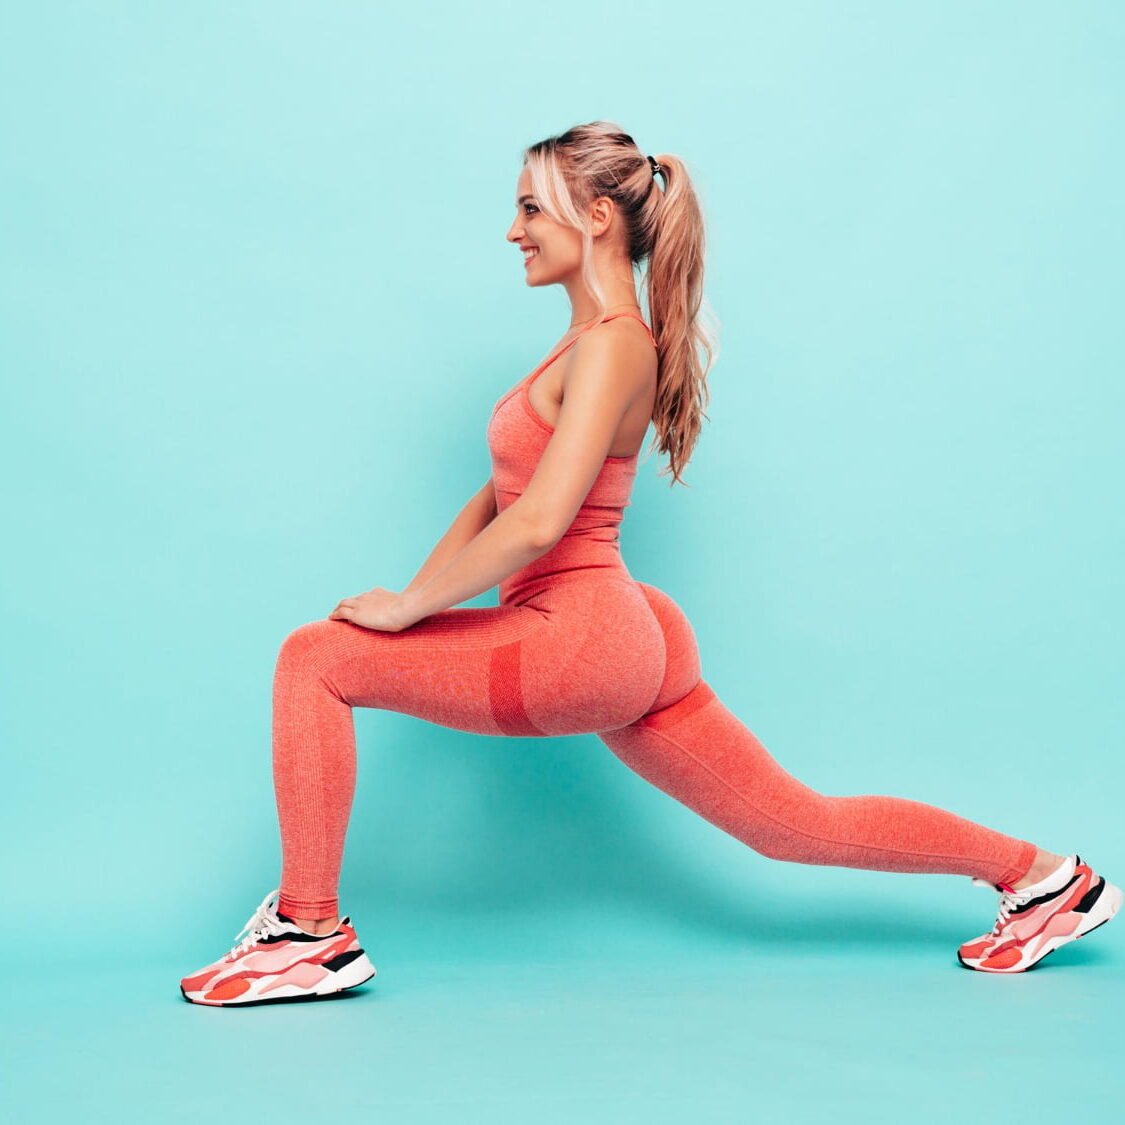 10 Gluteus Medius Minimus Exercises For Strengthening Your Hips And Glutes